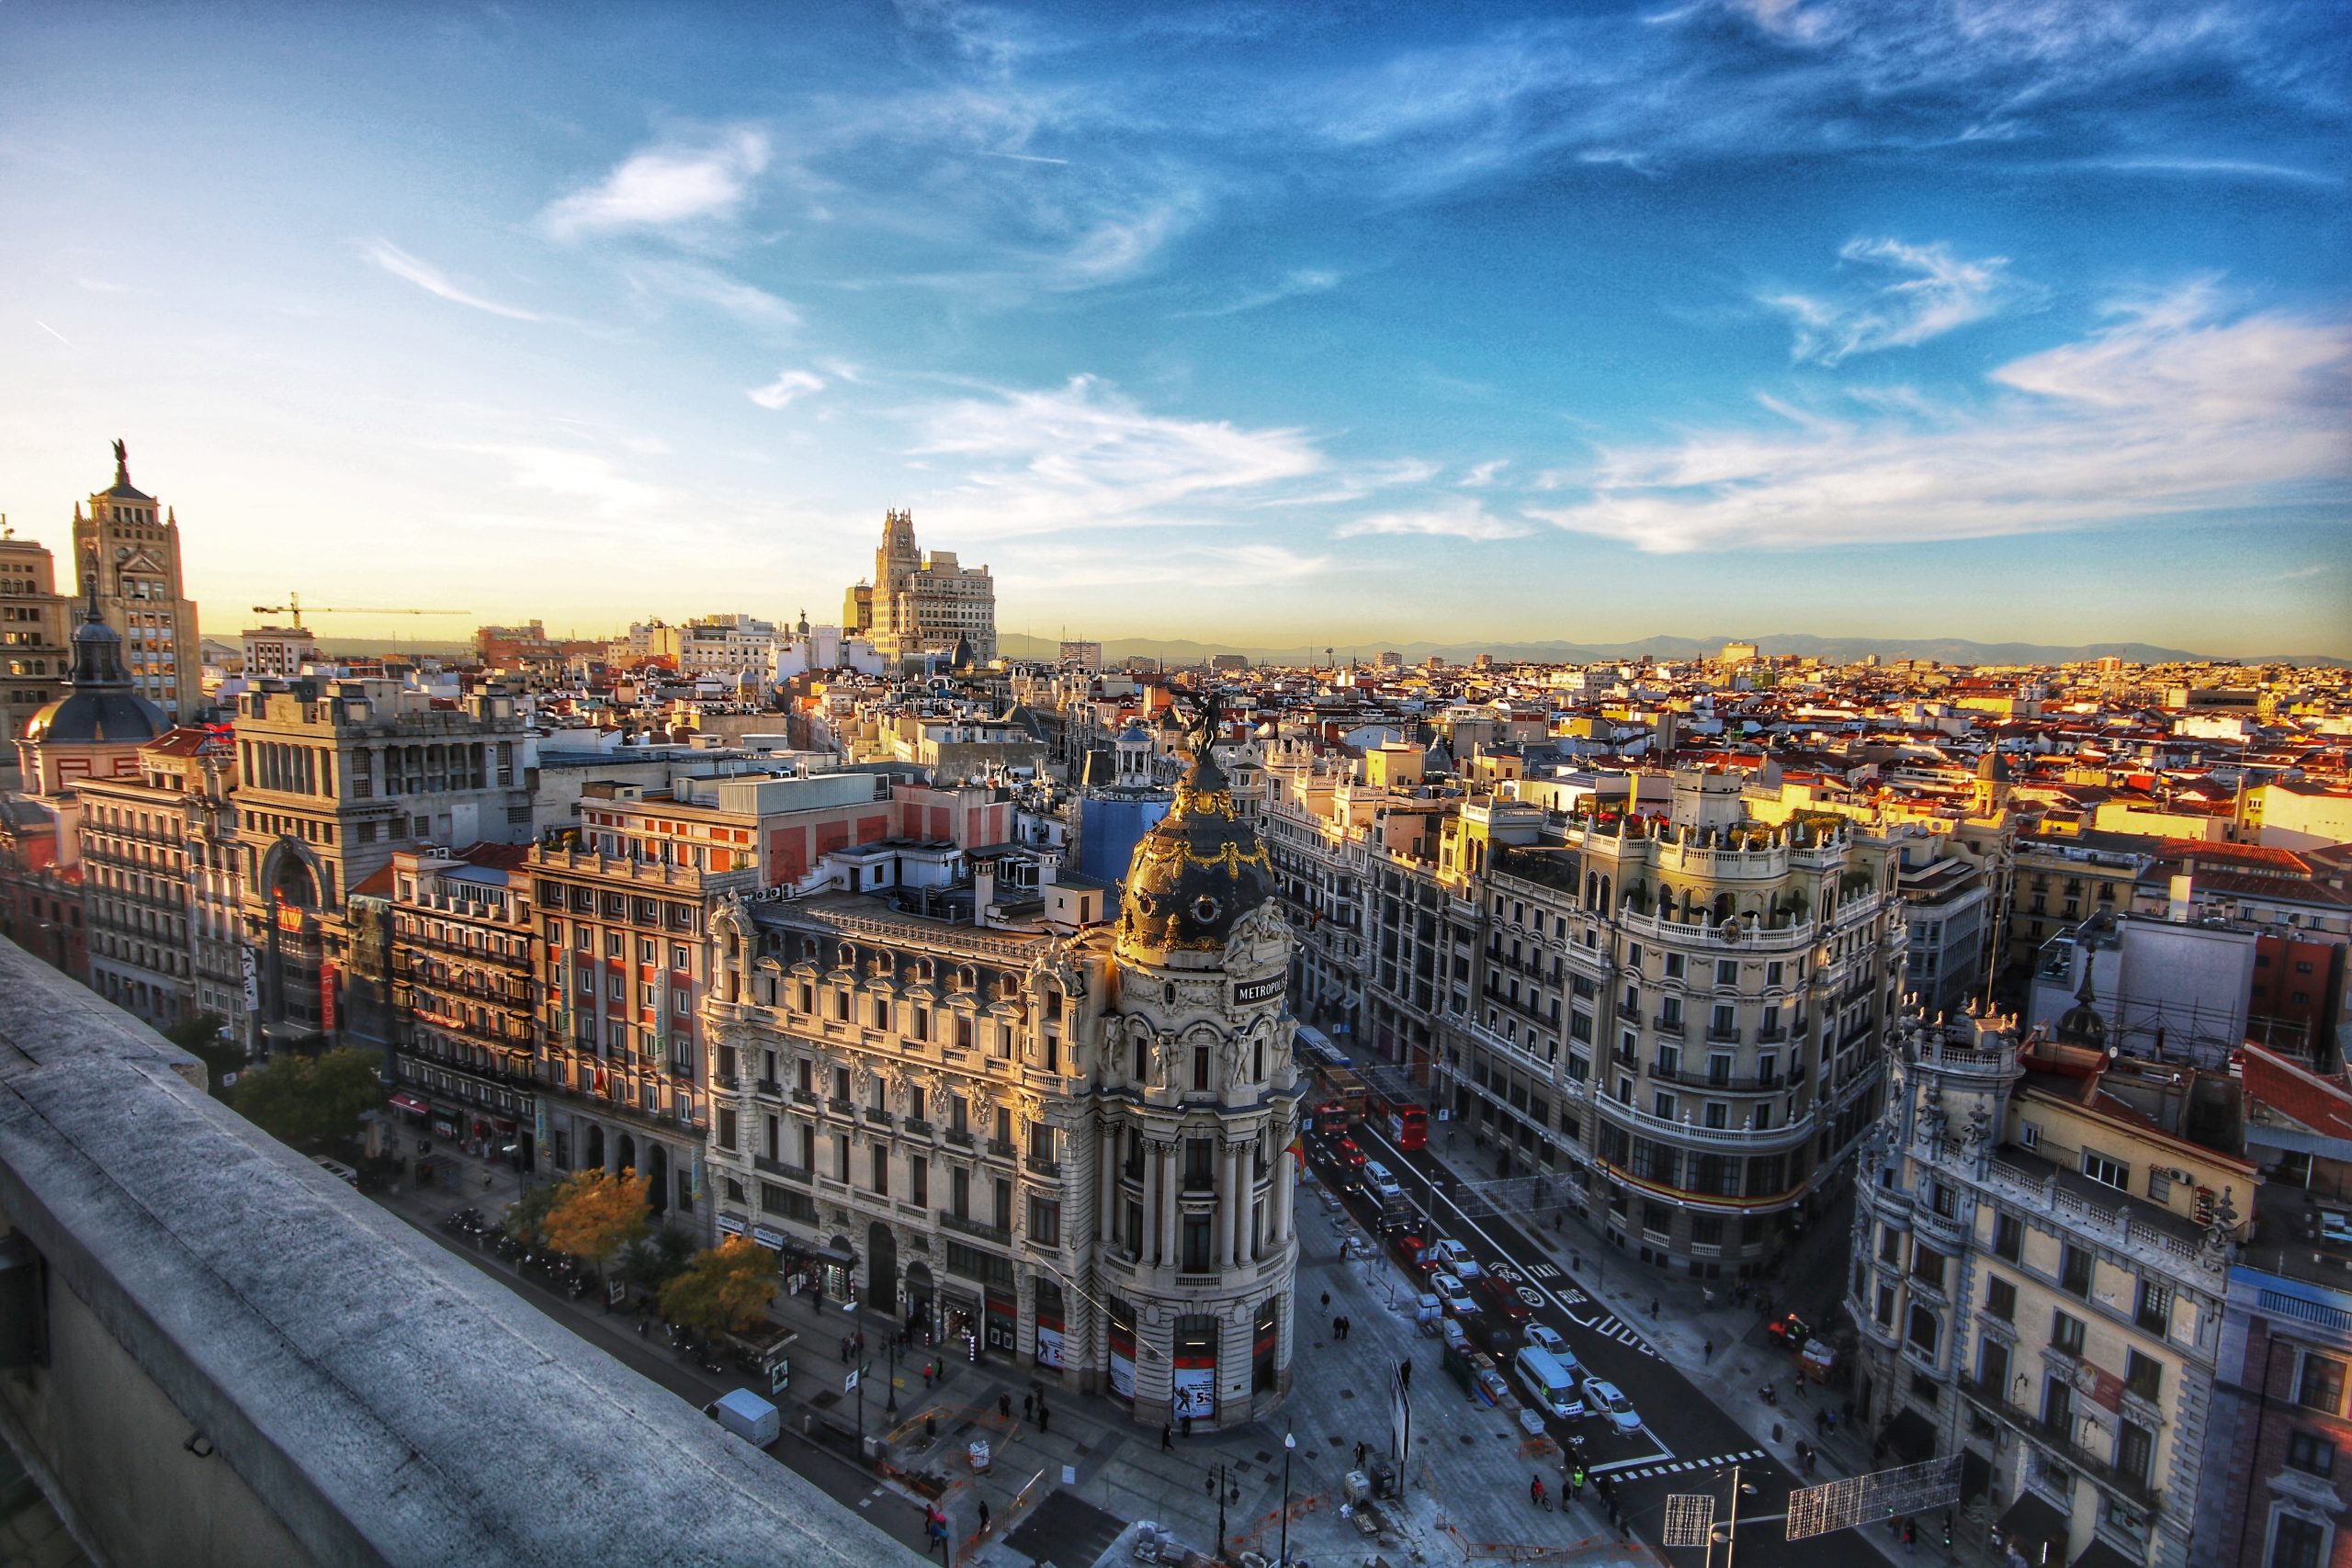 Madrid looking beautiful from above at sunset